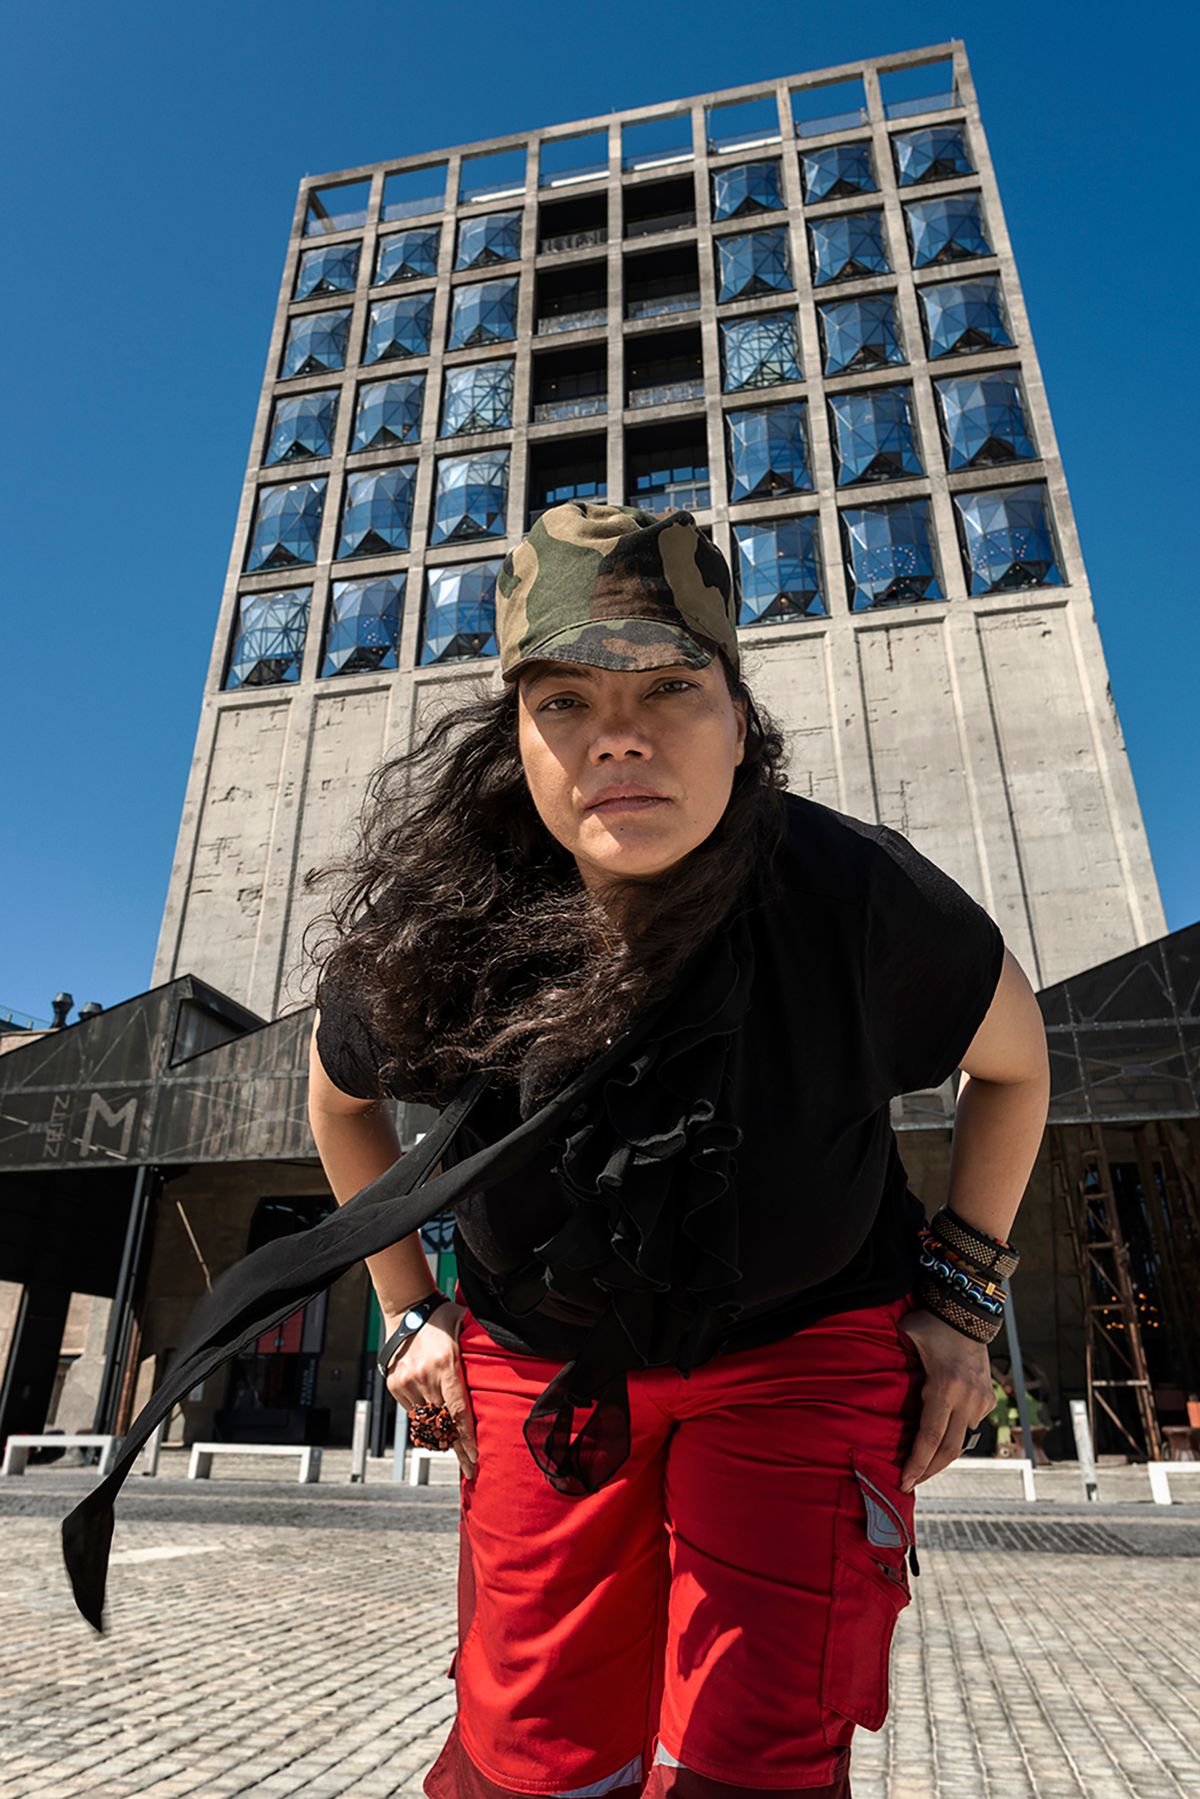 The South African artist Tracey Rose Courtesy of ZEITZ MOCAA